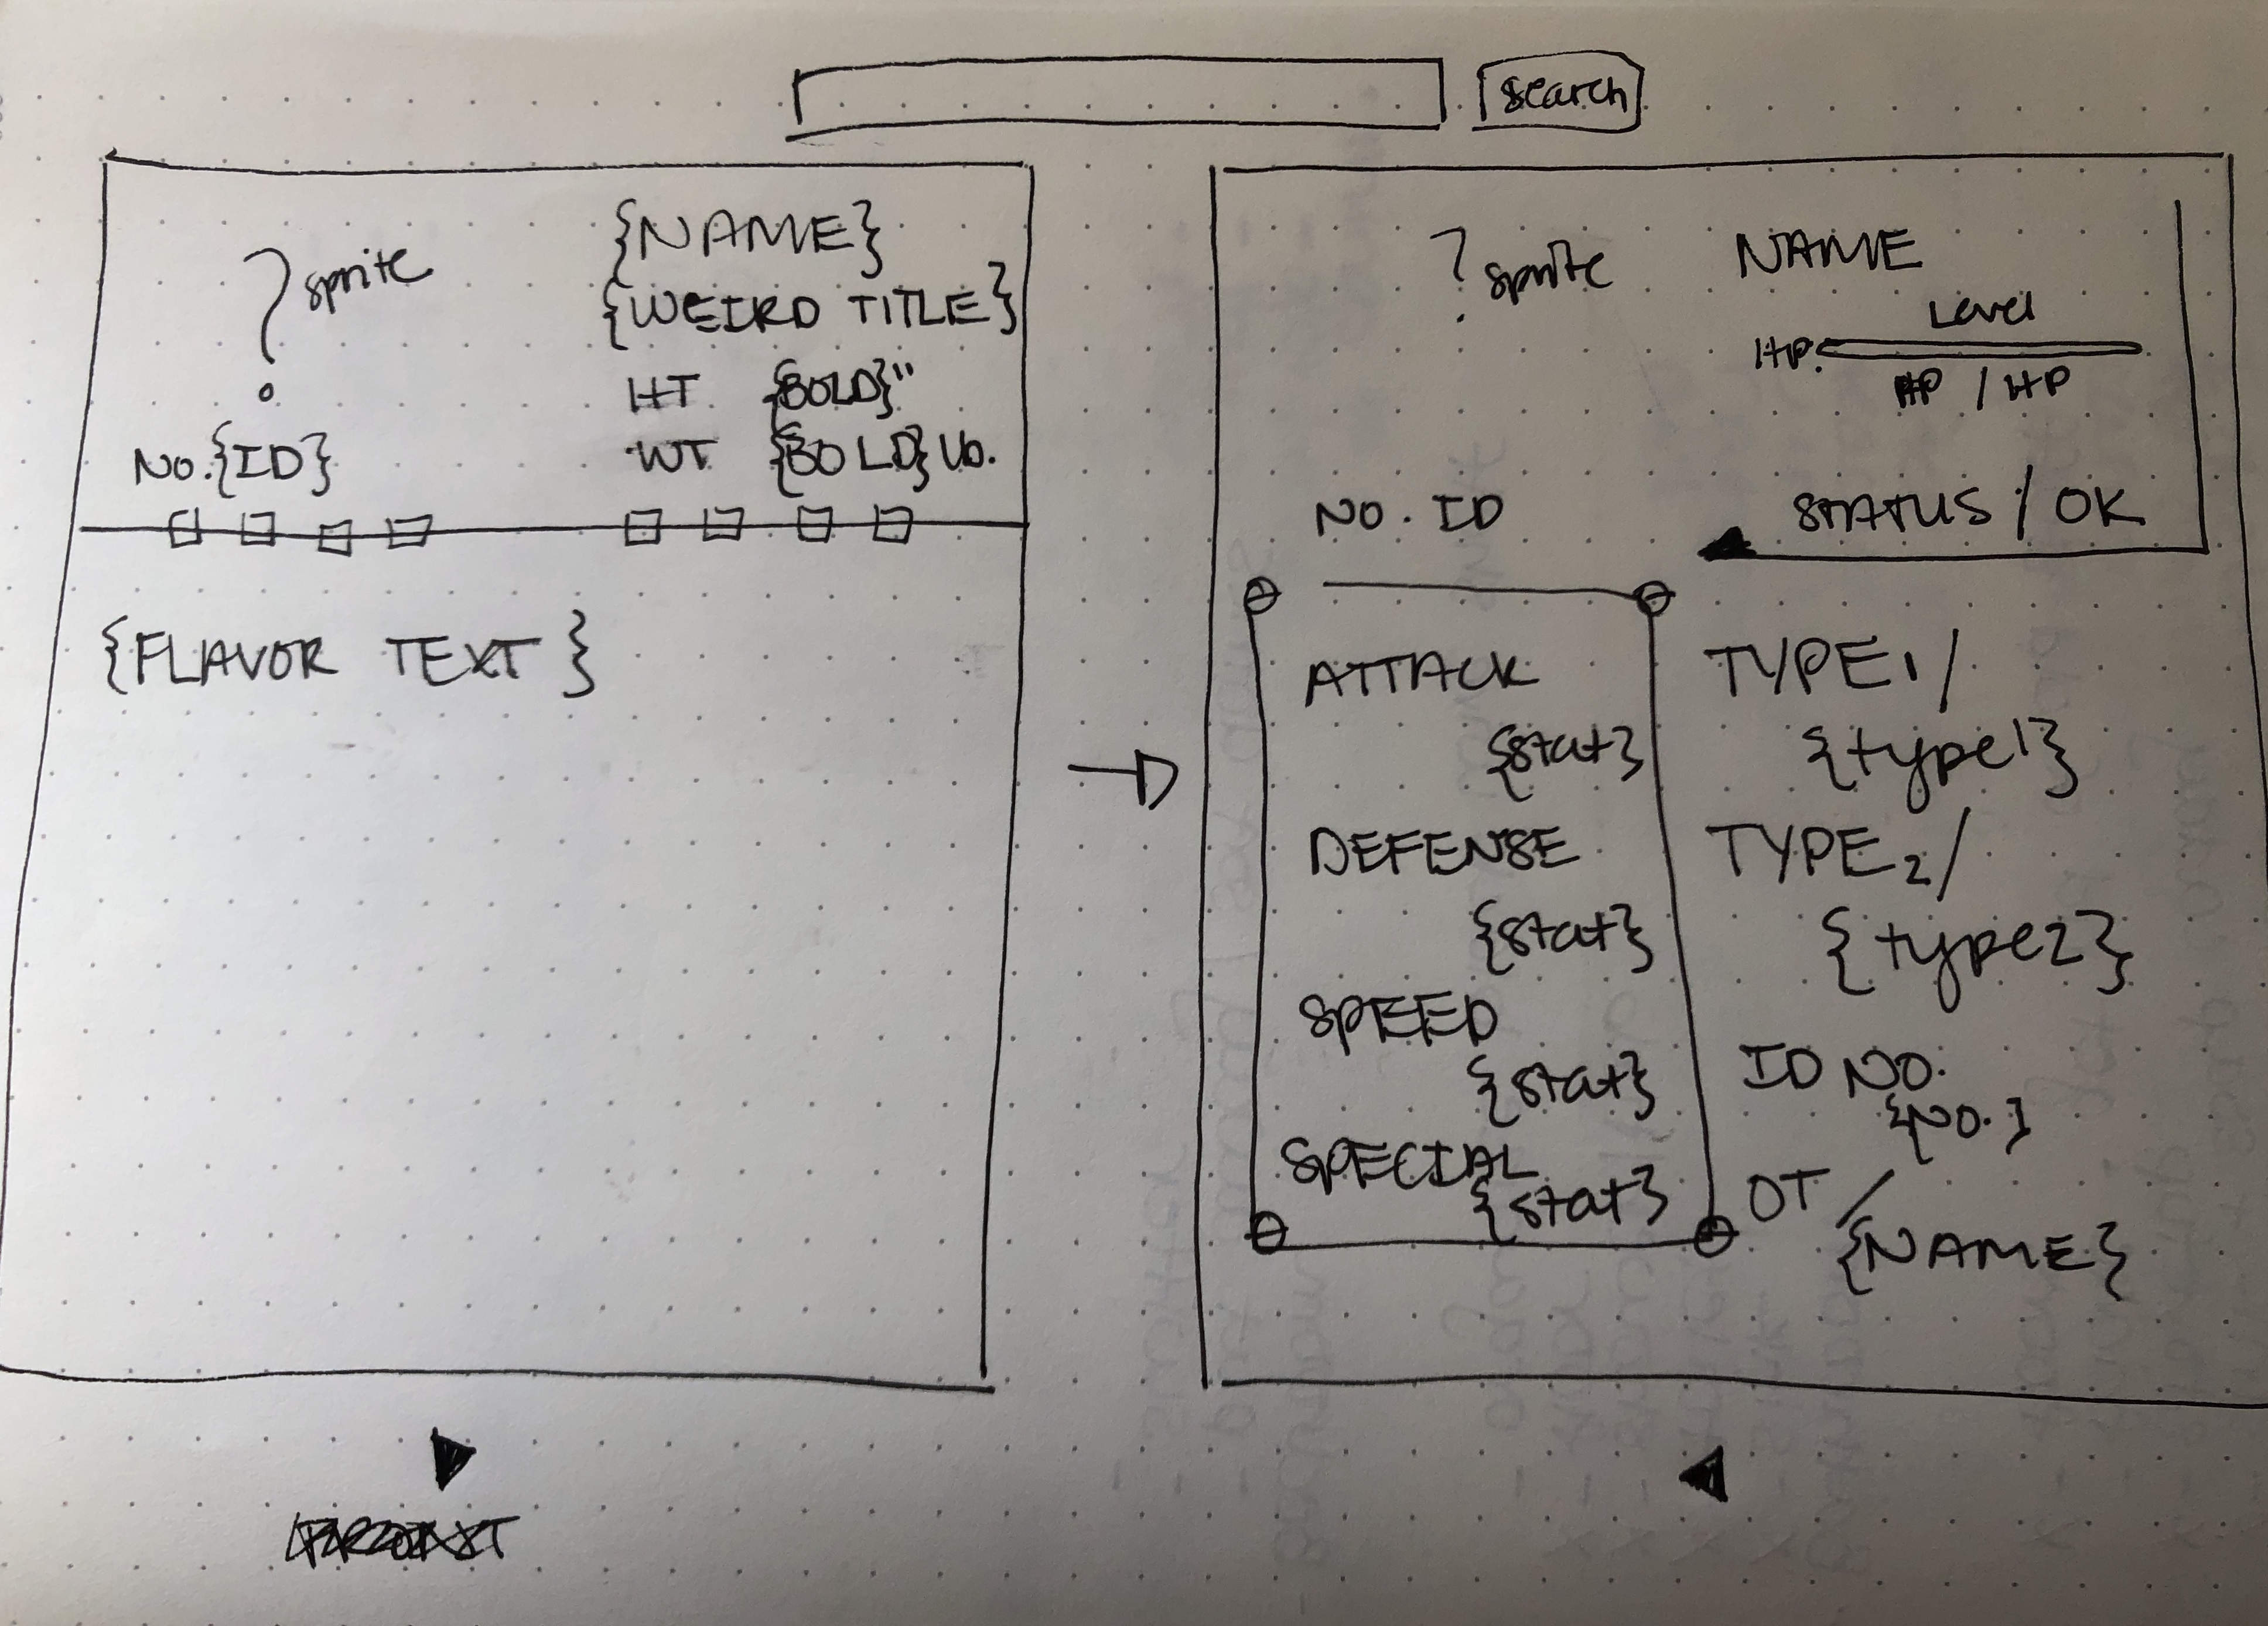 A page from my notebook with hand-drawn wireframes